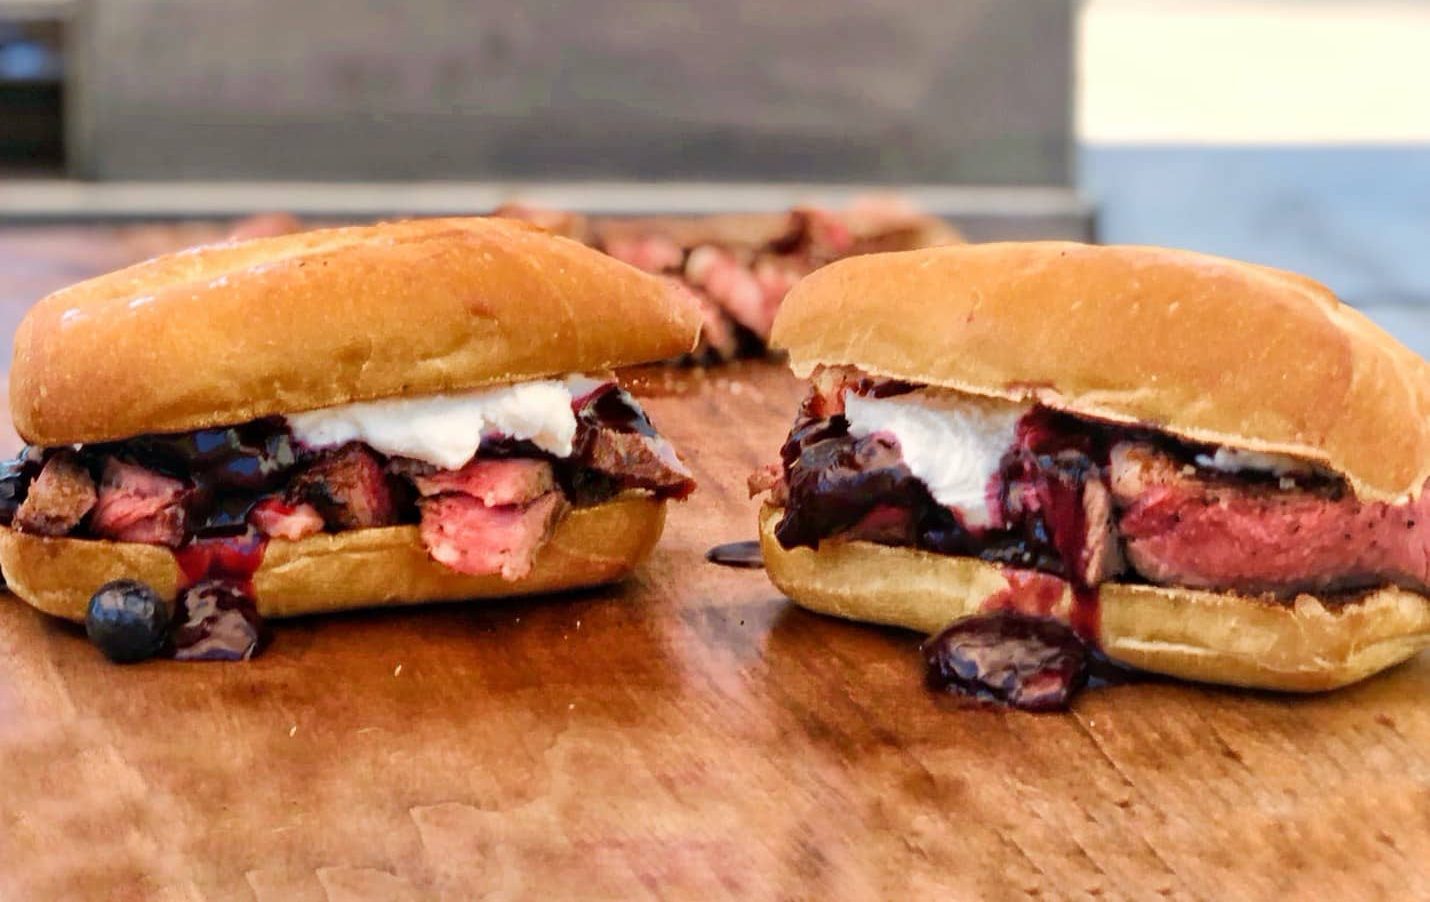 Red, White and Blue Ribeye Sandwiches from the Beefer